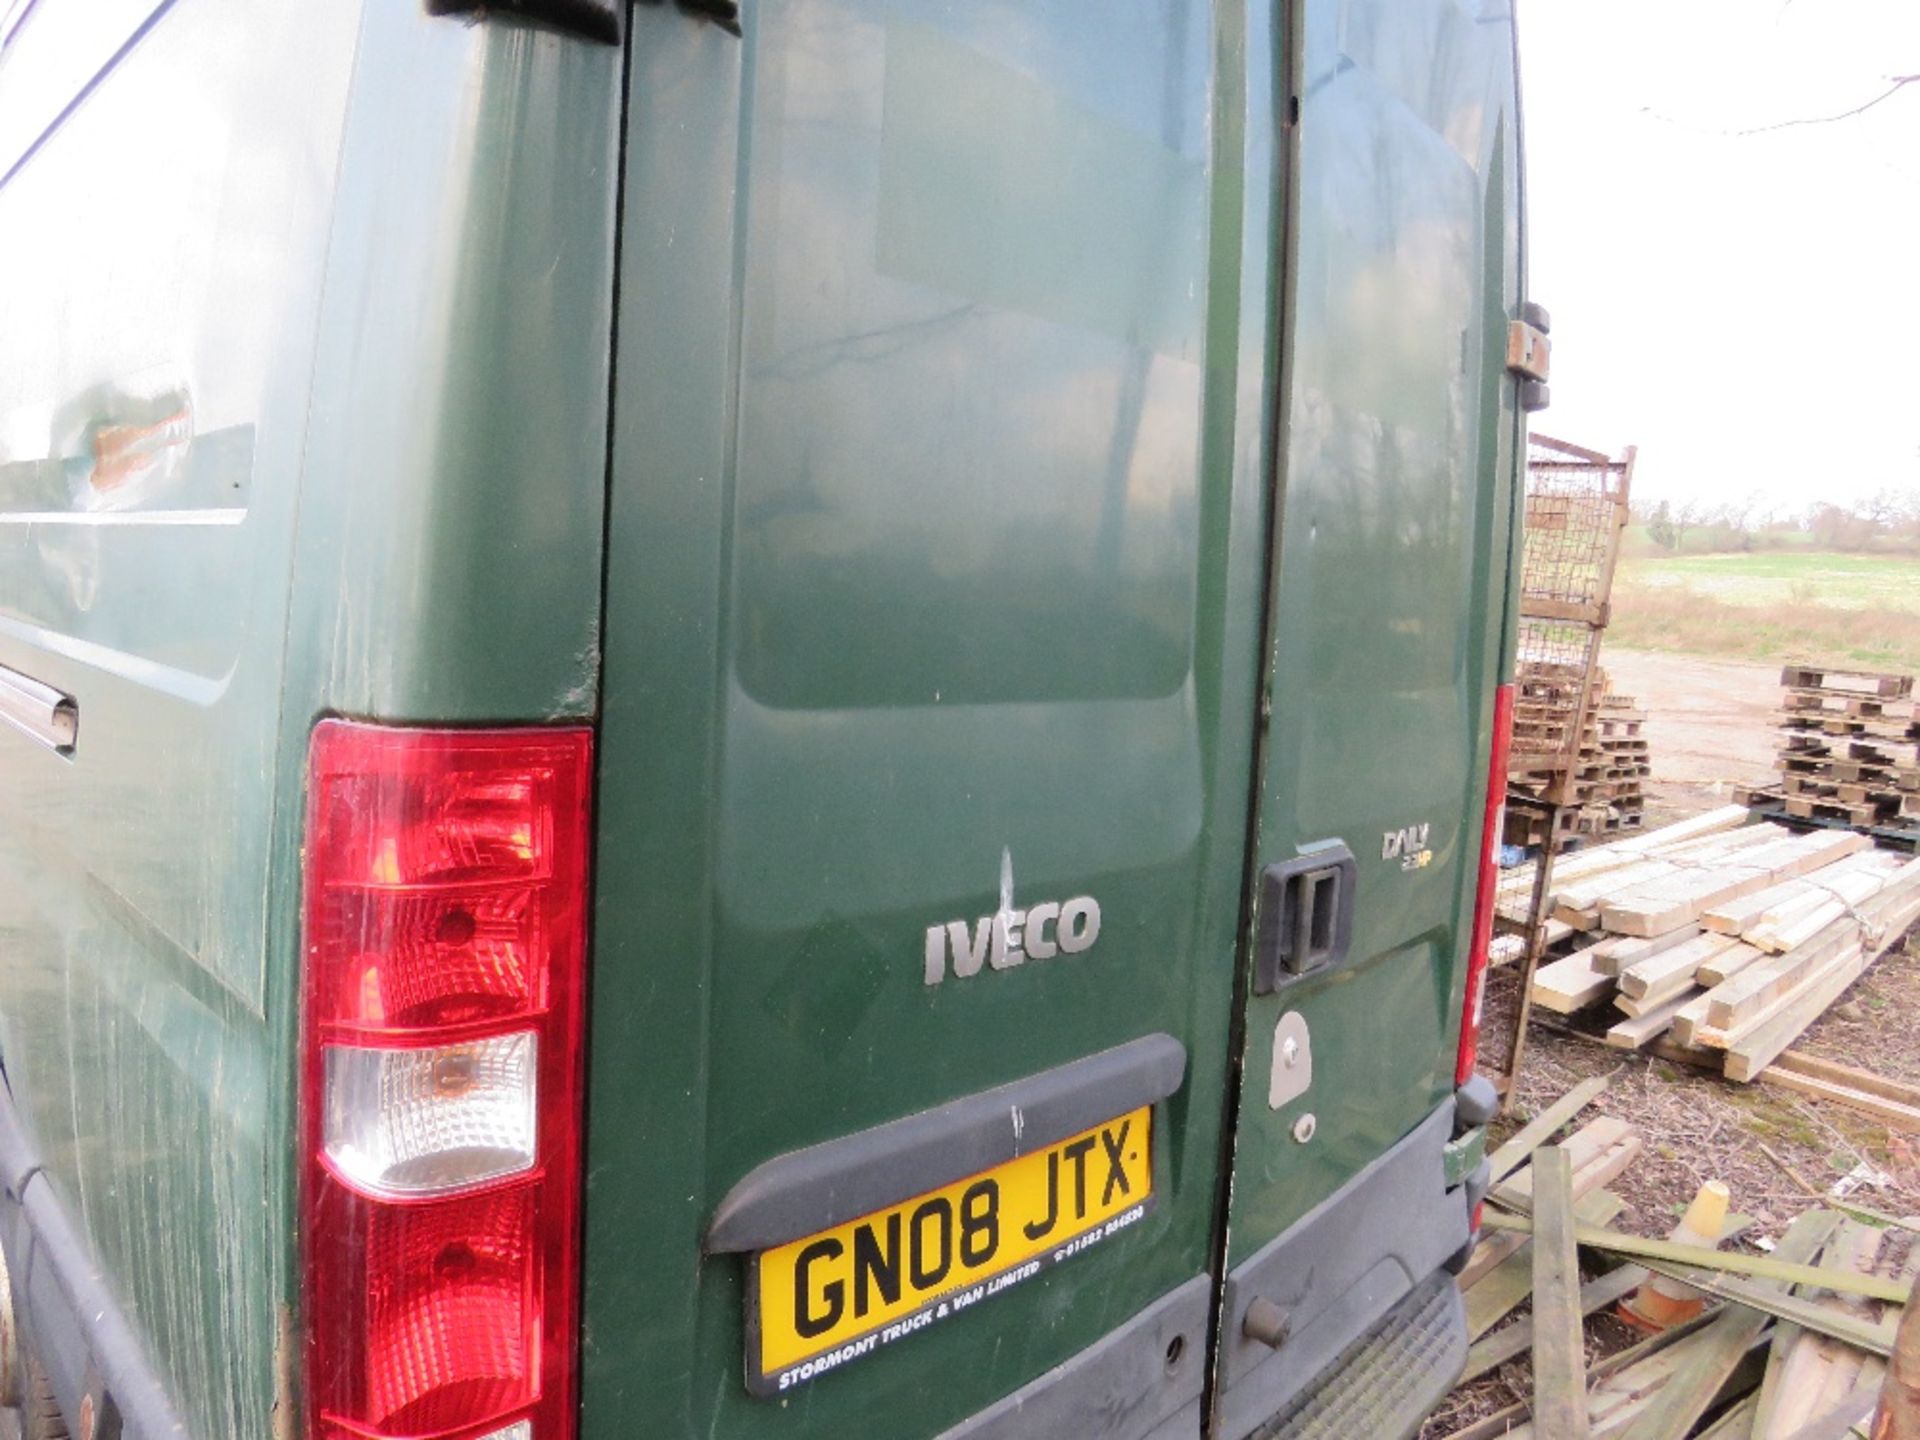 IVECO 35.125 PANEL VAN WITH HIGH ROOF REG:GN08 JTX. MOT EXPIRED, V5 TO APPLY FOR. WHEN TESTED WAS SE - Image 6 of 9